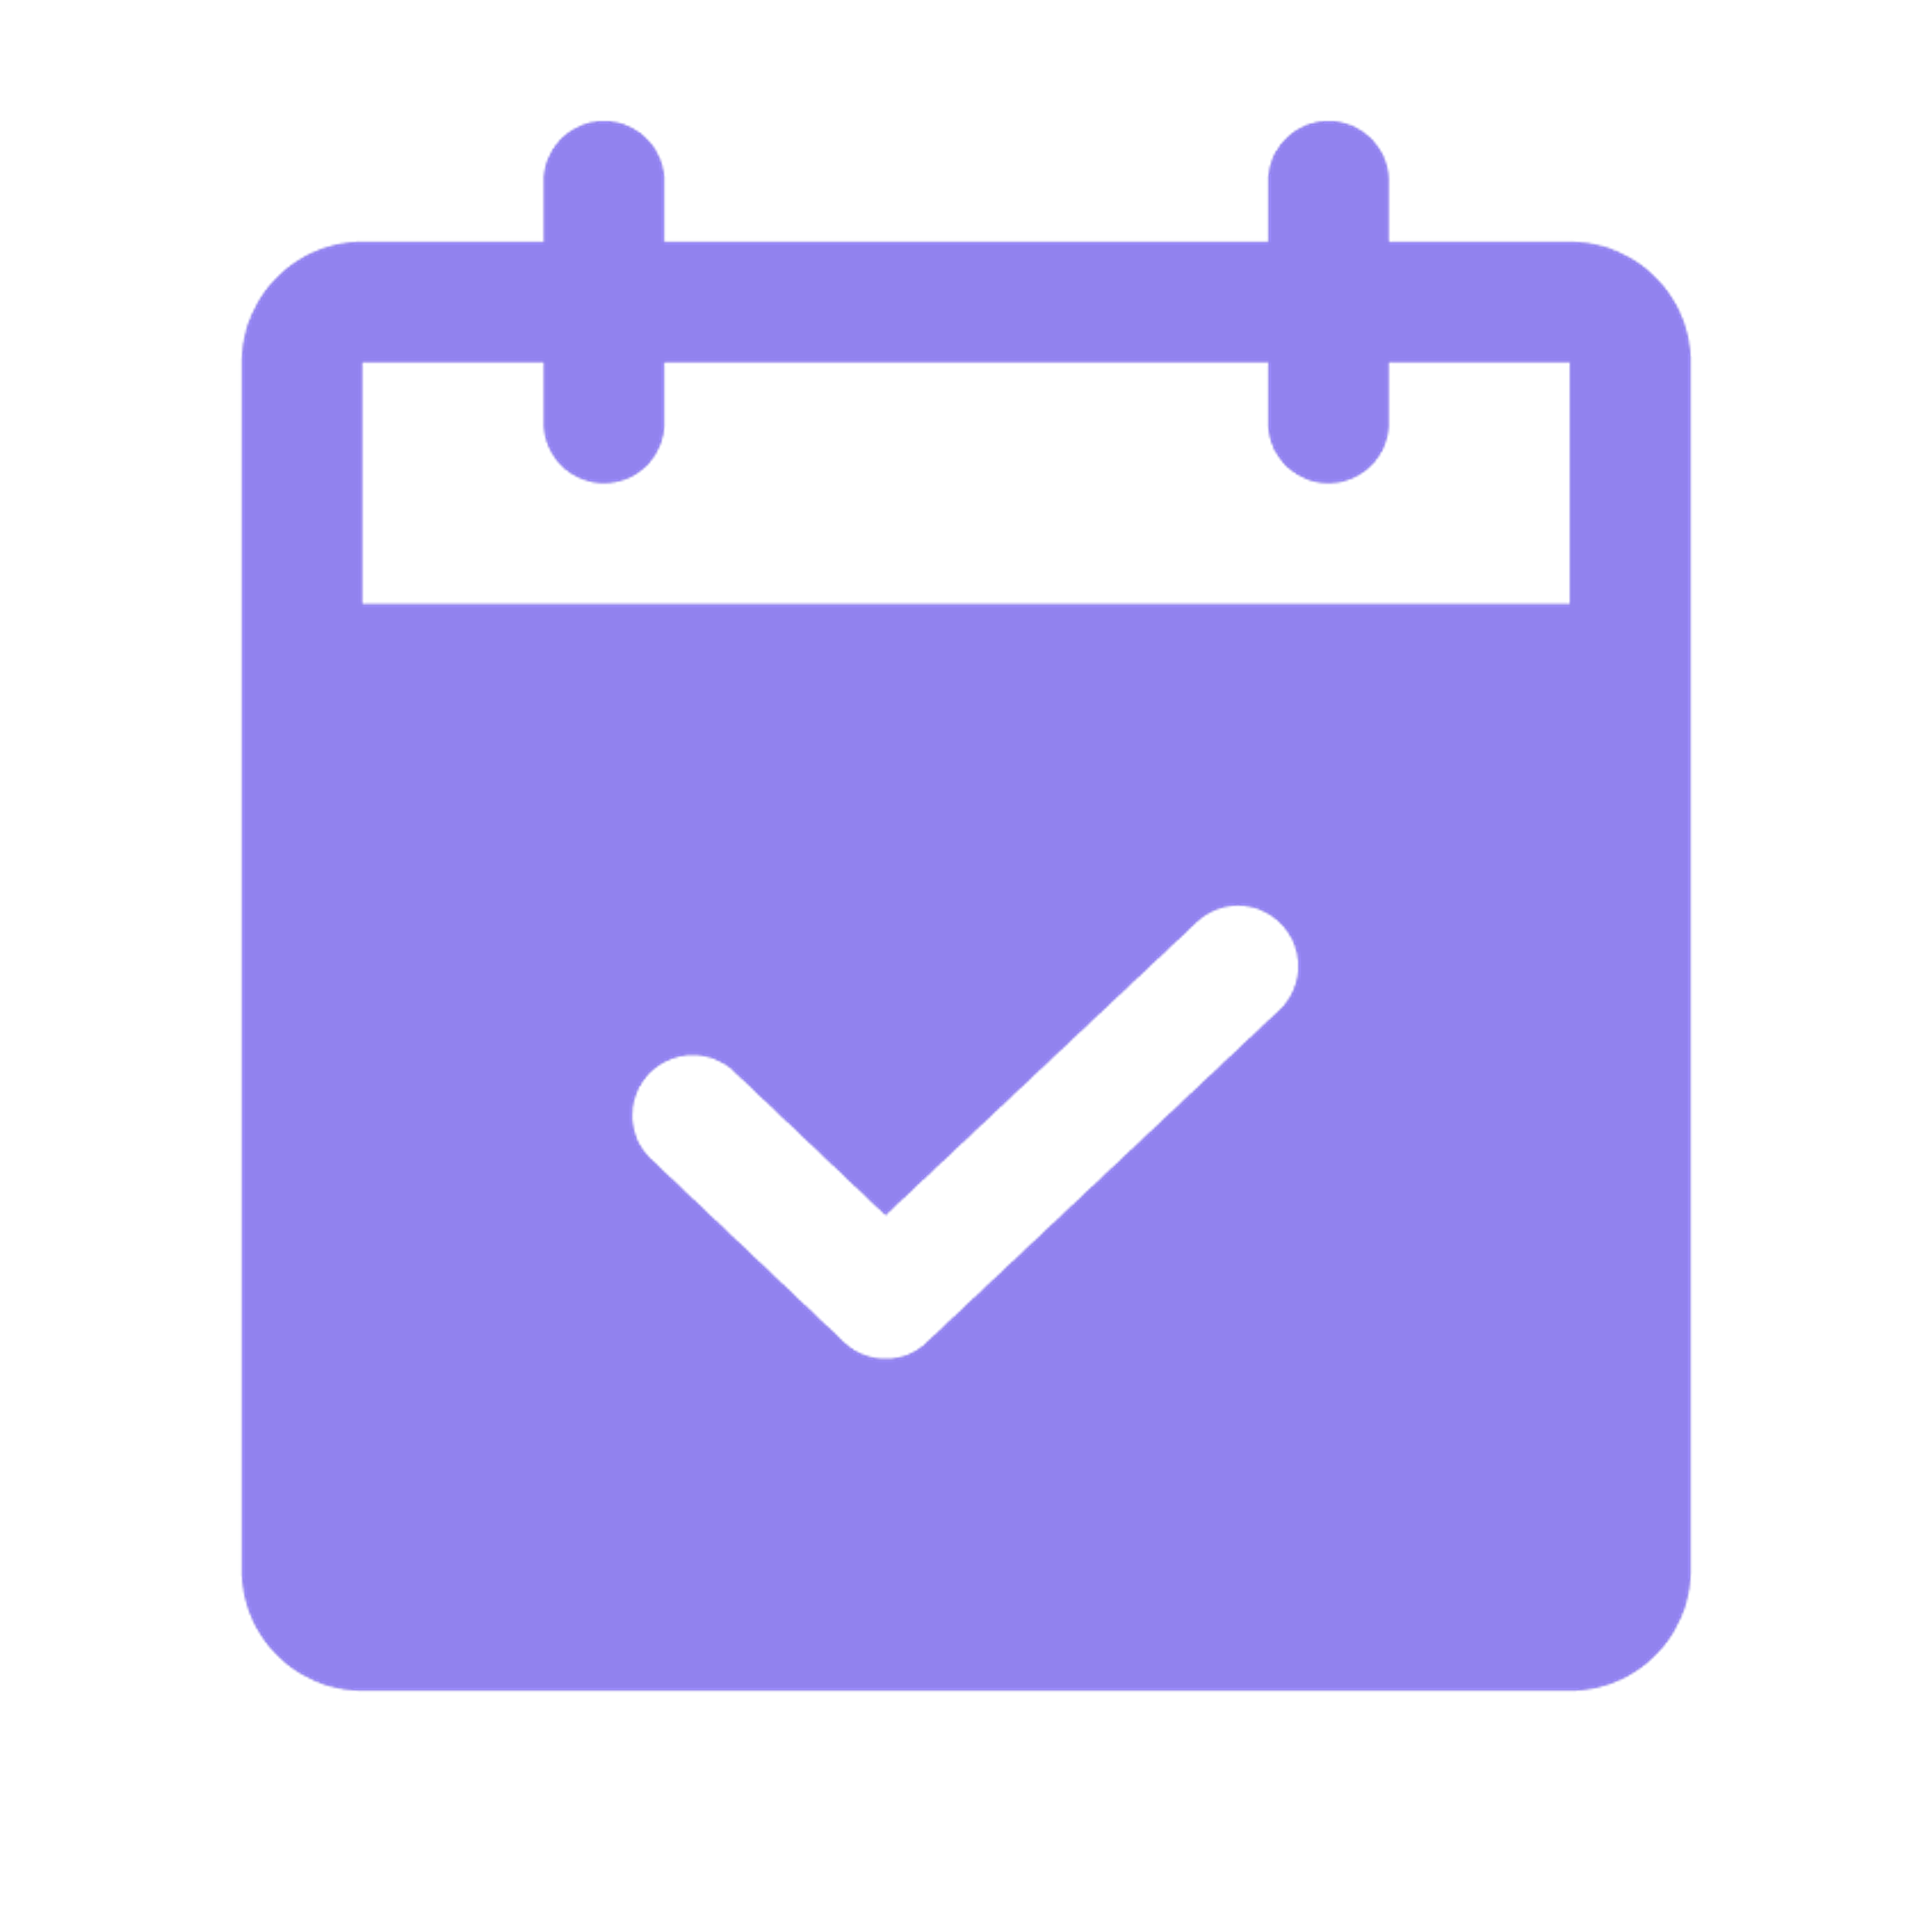 A purple icon of a calendar on a transparent background